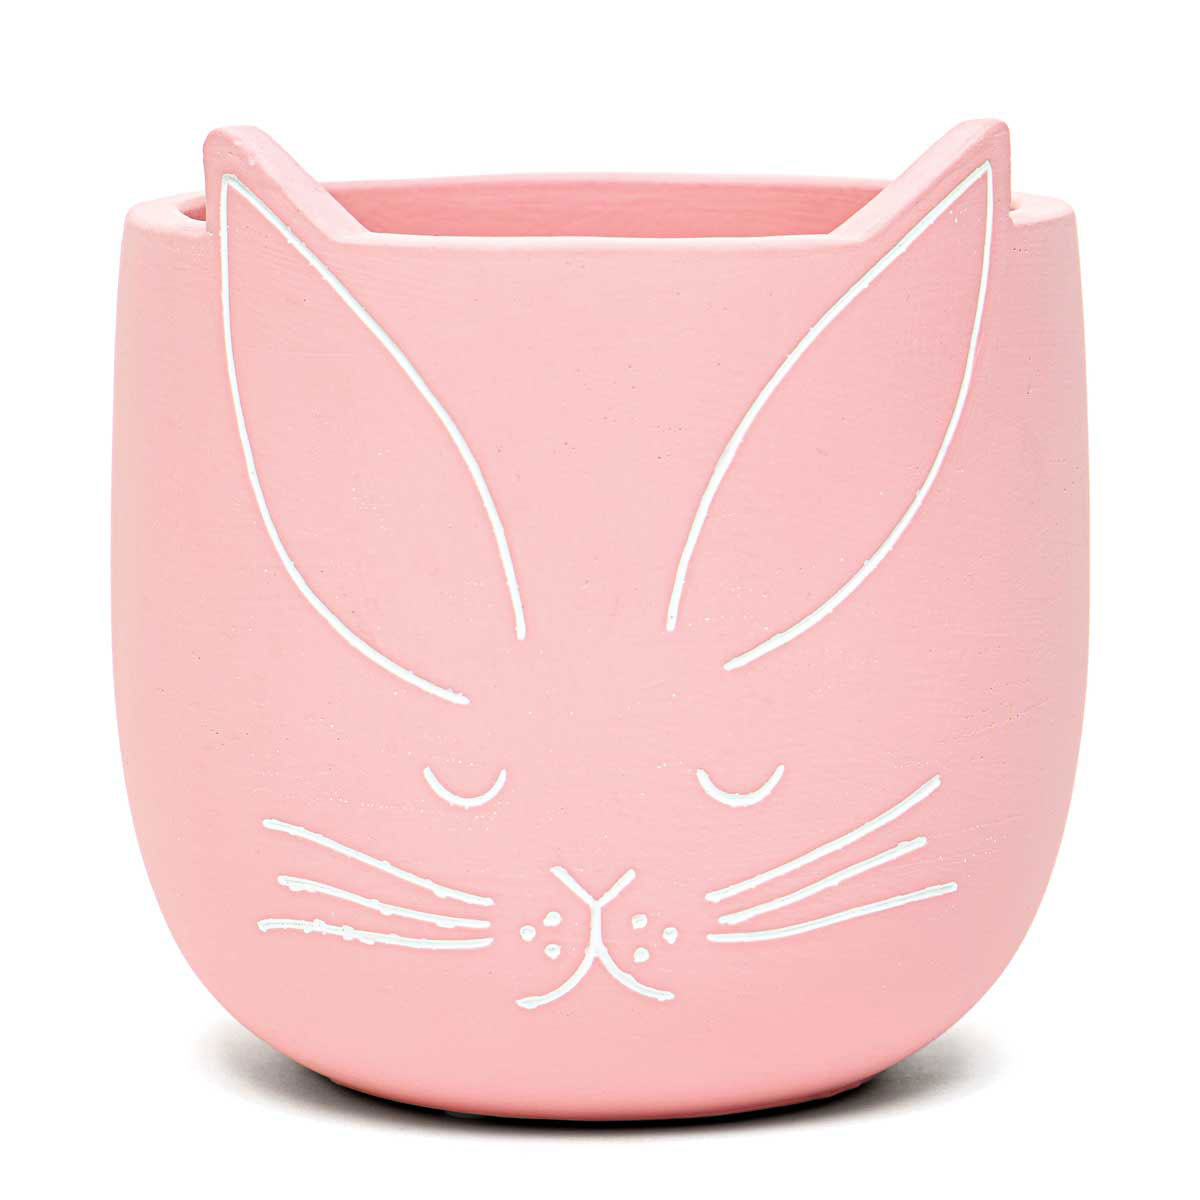 !Muffy Bunny Face Concrete Pot Pink Large